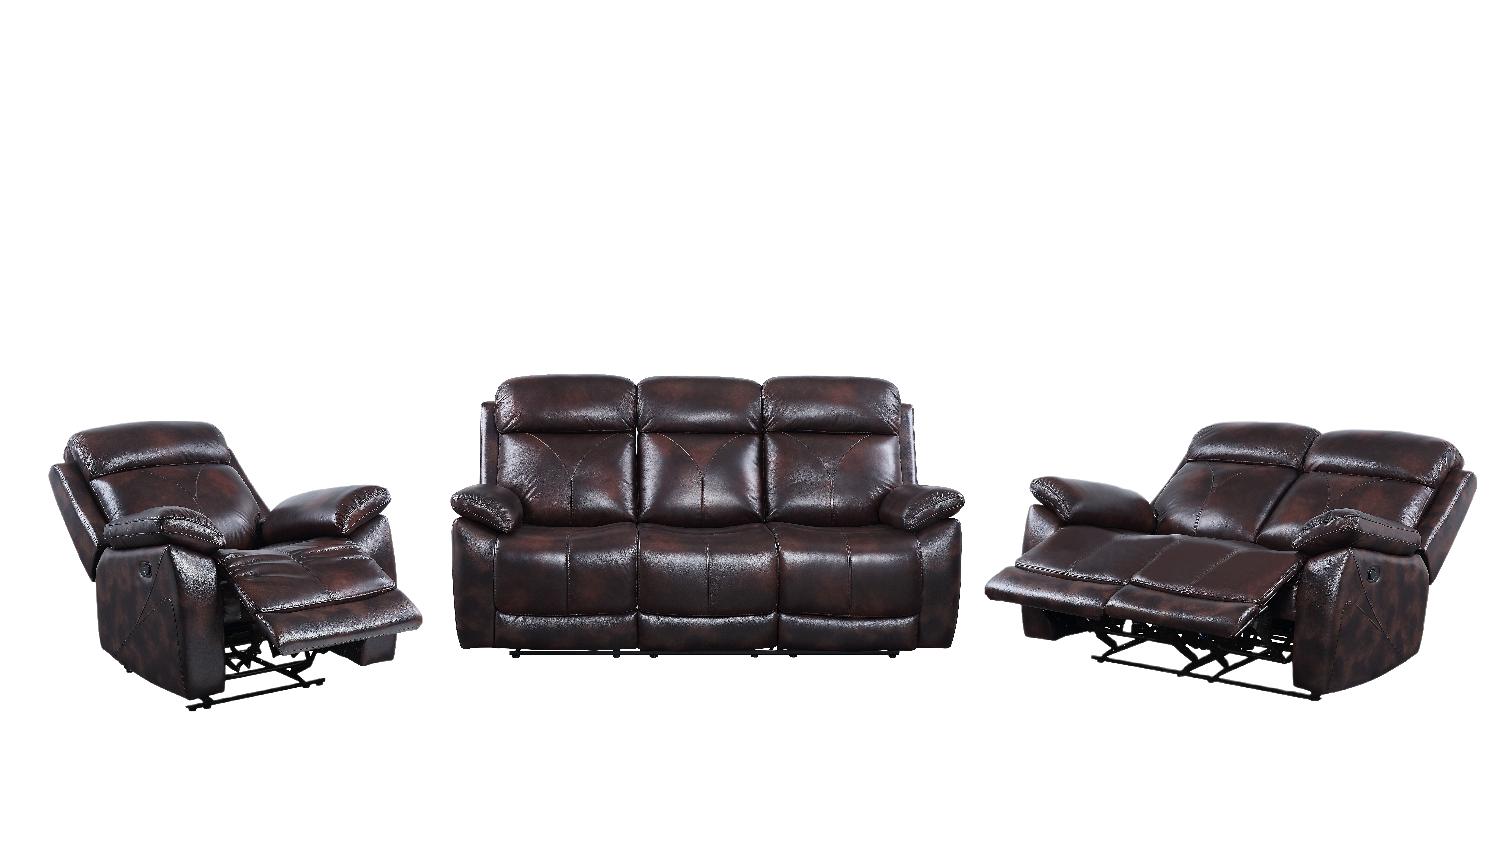 Contemporary Sofa Loveseat and Chair Set Perfiel LV00066-3pcs in Dark Brown Leather